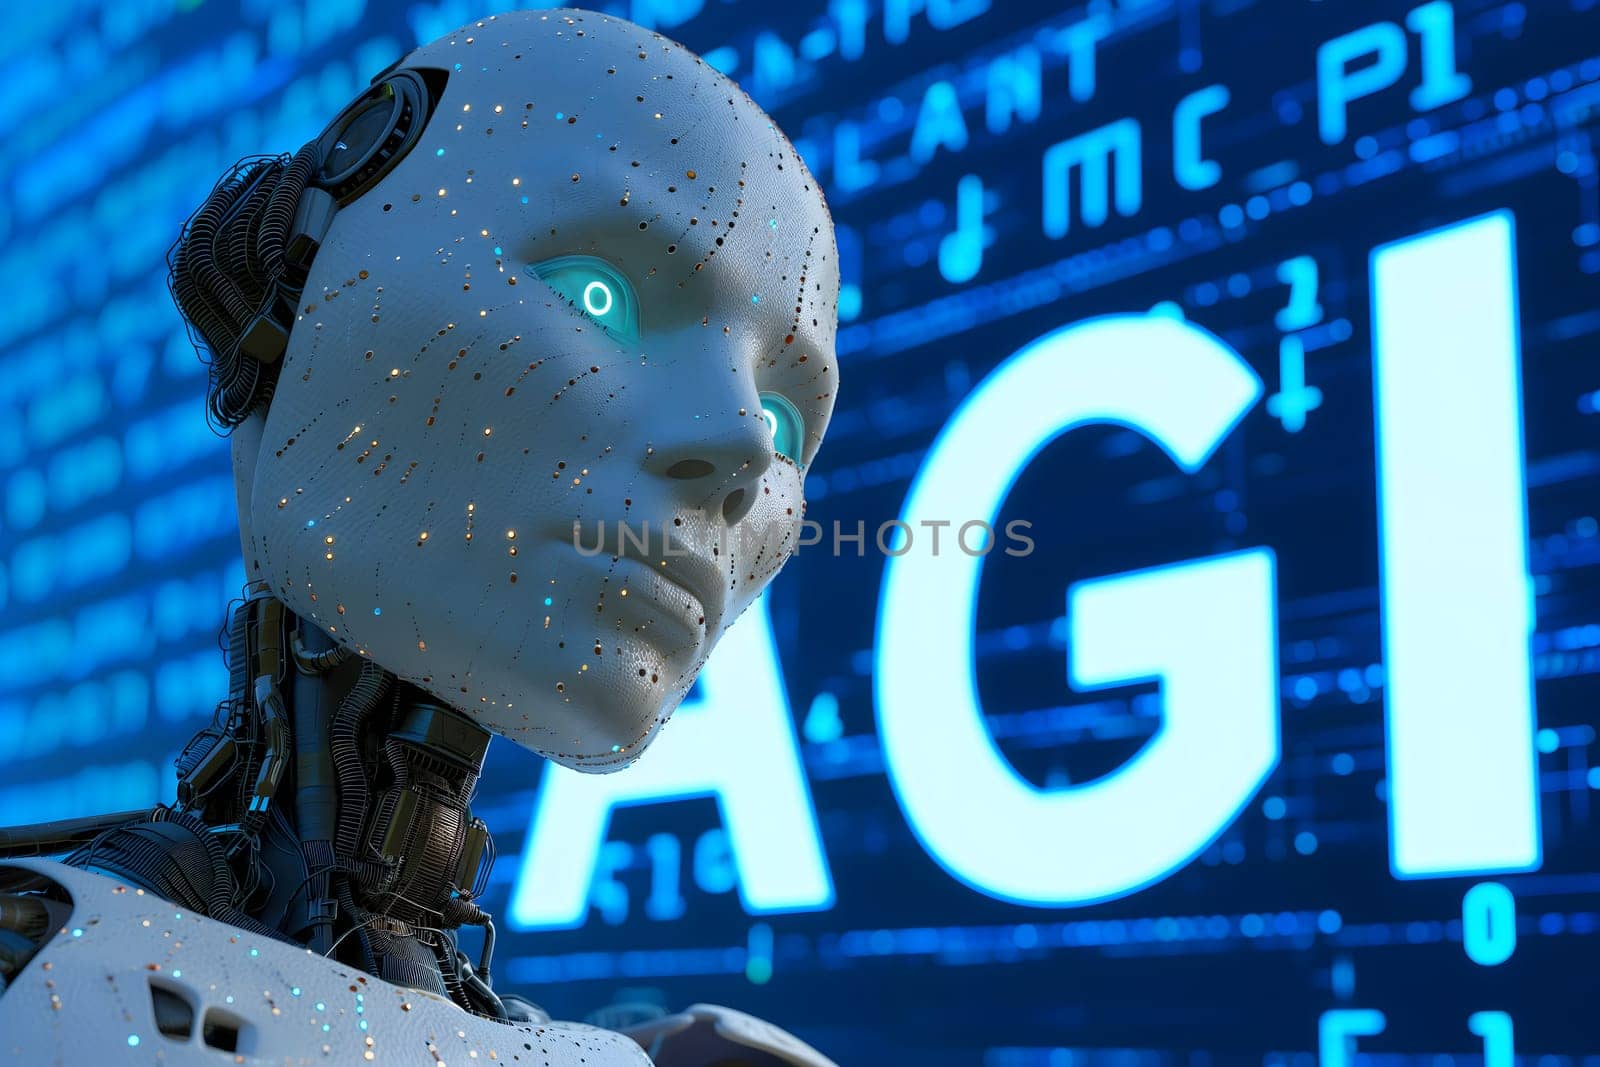 Android head on abstract cybernetic data background with word AGI for Artificial General Intelligence by z1b